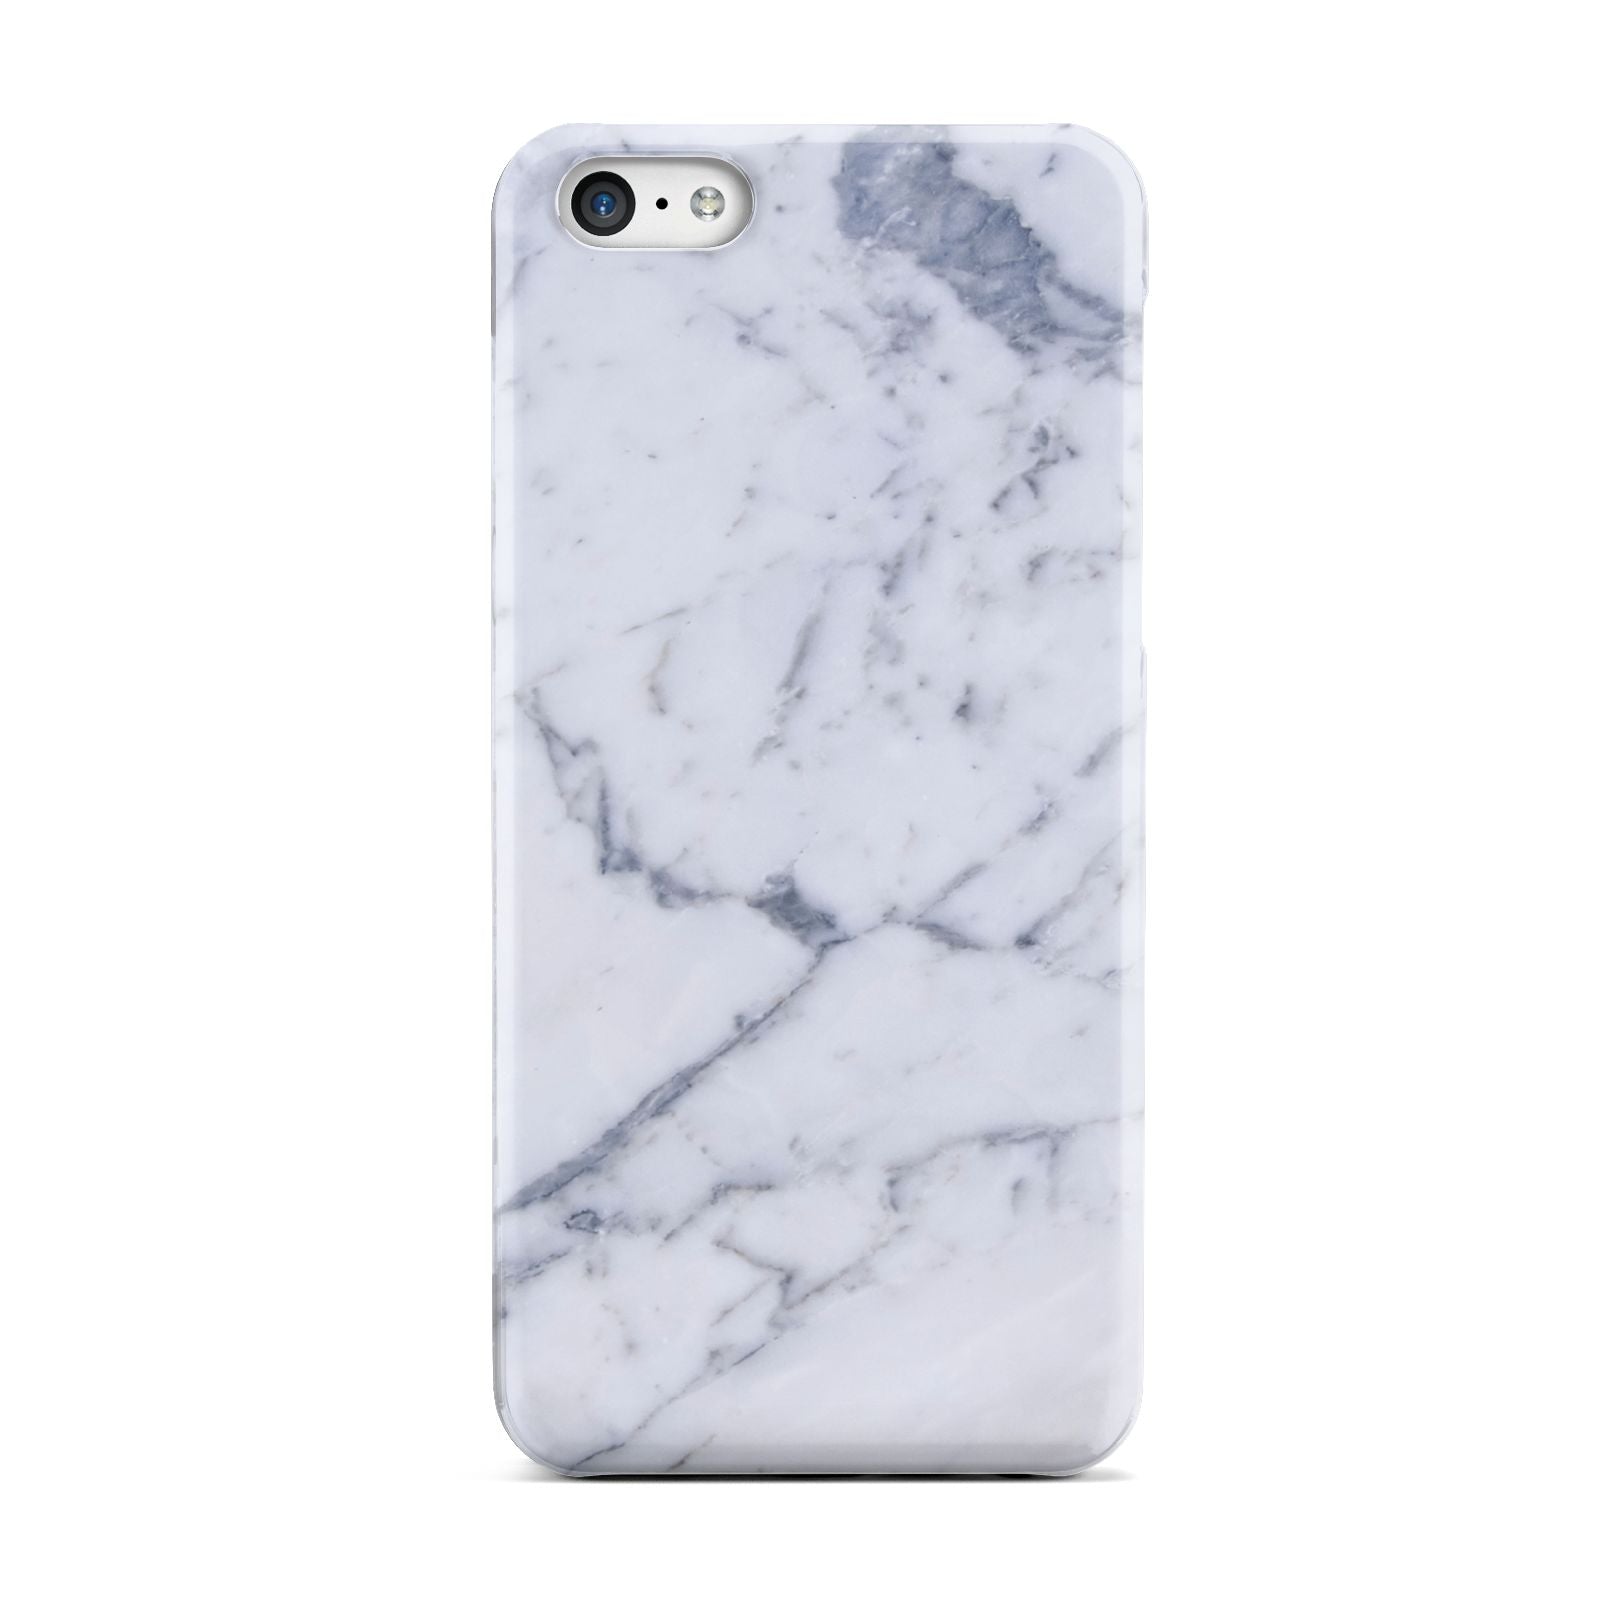 Faux Marble Grey White Apple iPhone 5c Case